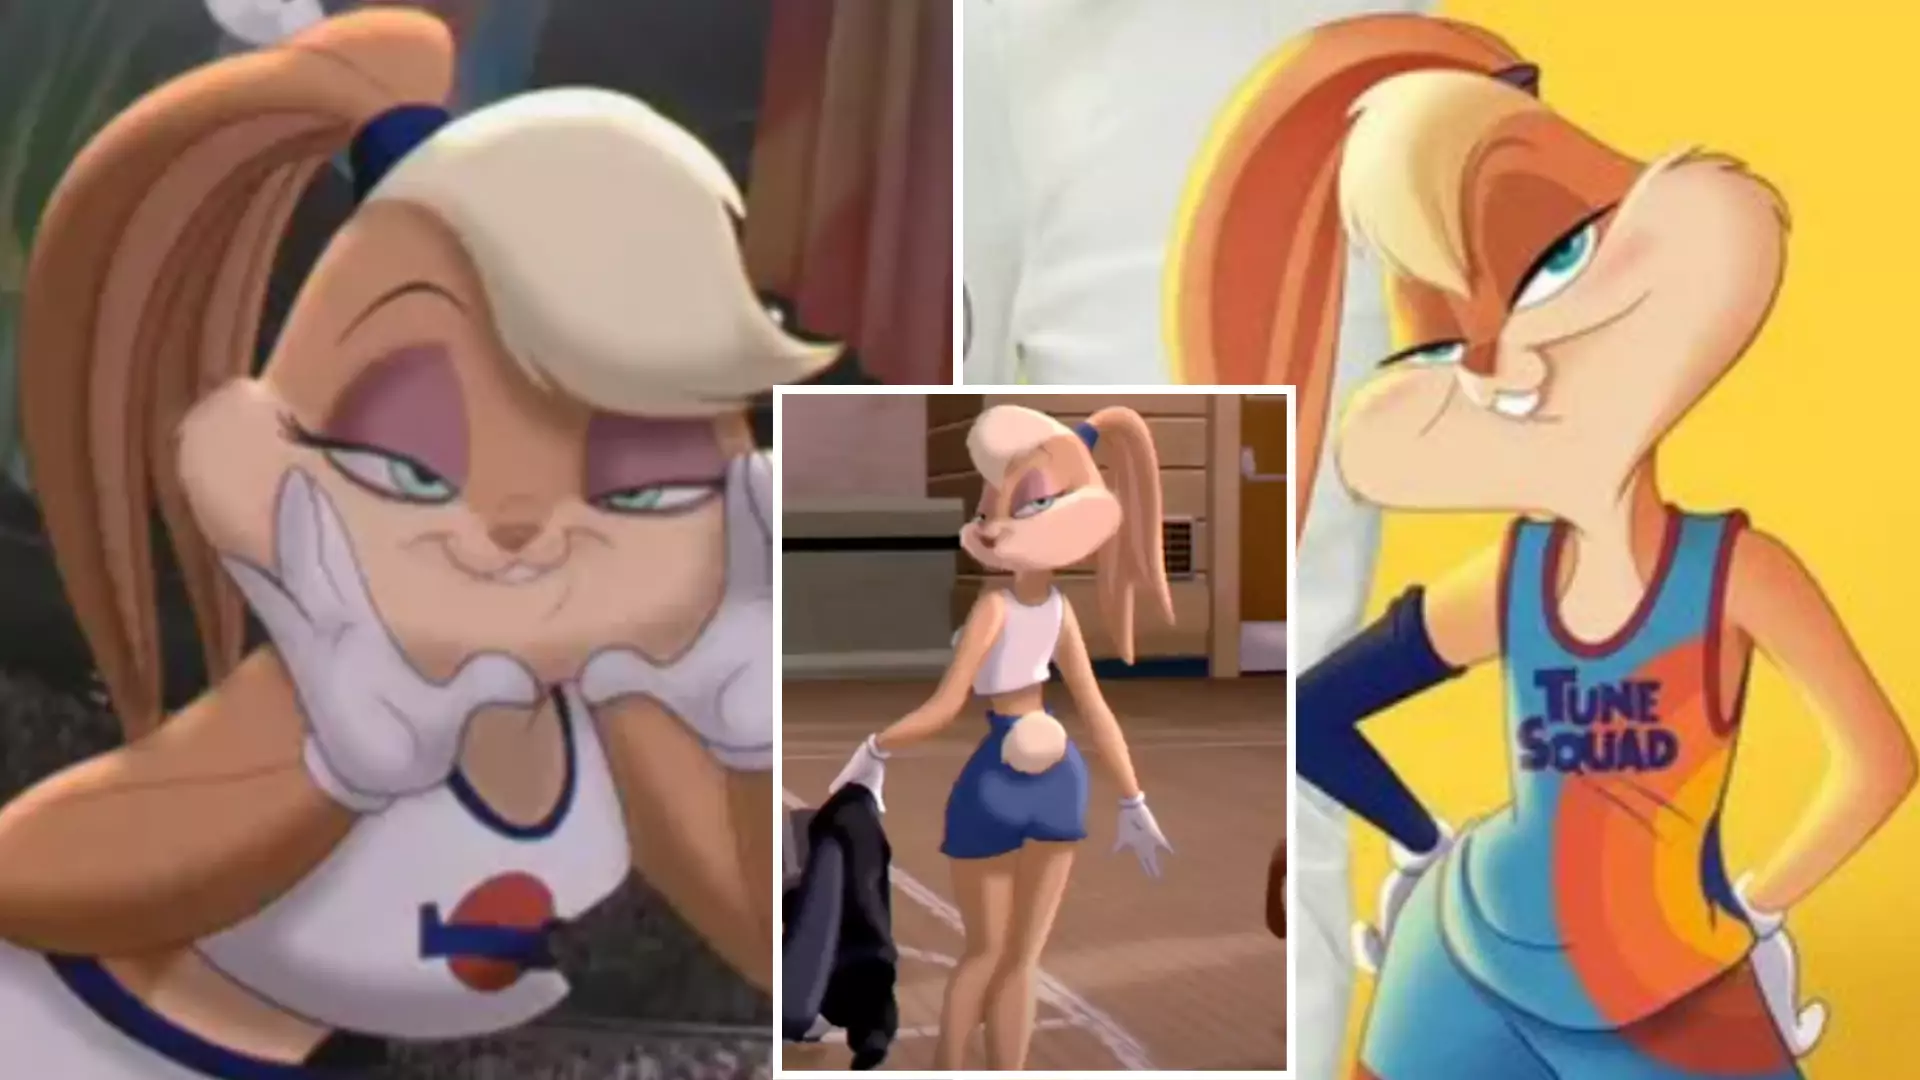 Space Jam 2 Director Breaks Silence Over Lola Bunny's Design Amid 'Desexualised' Backlash